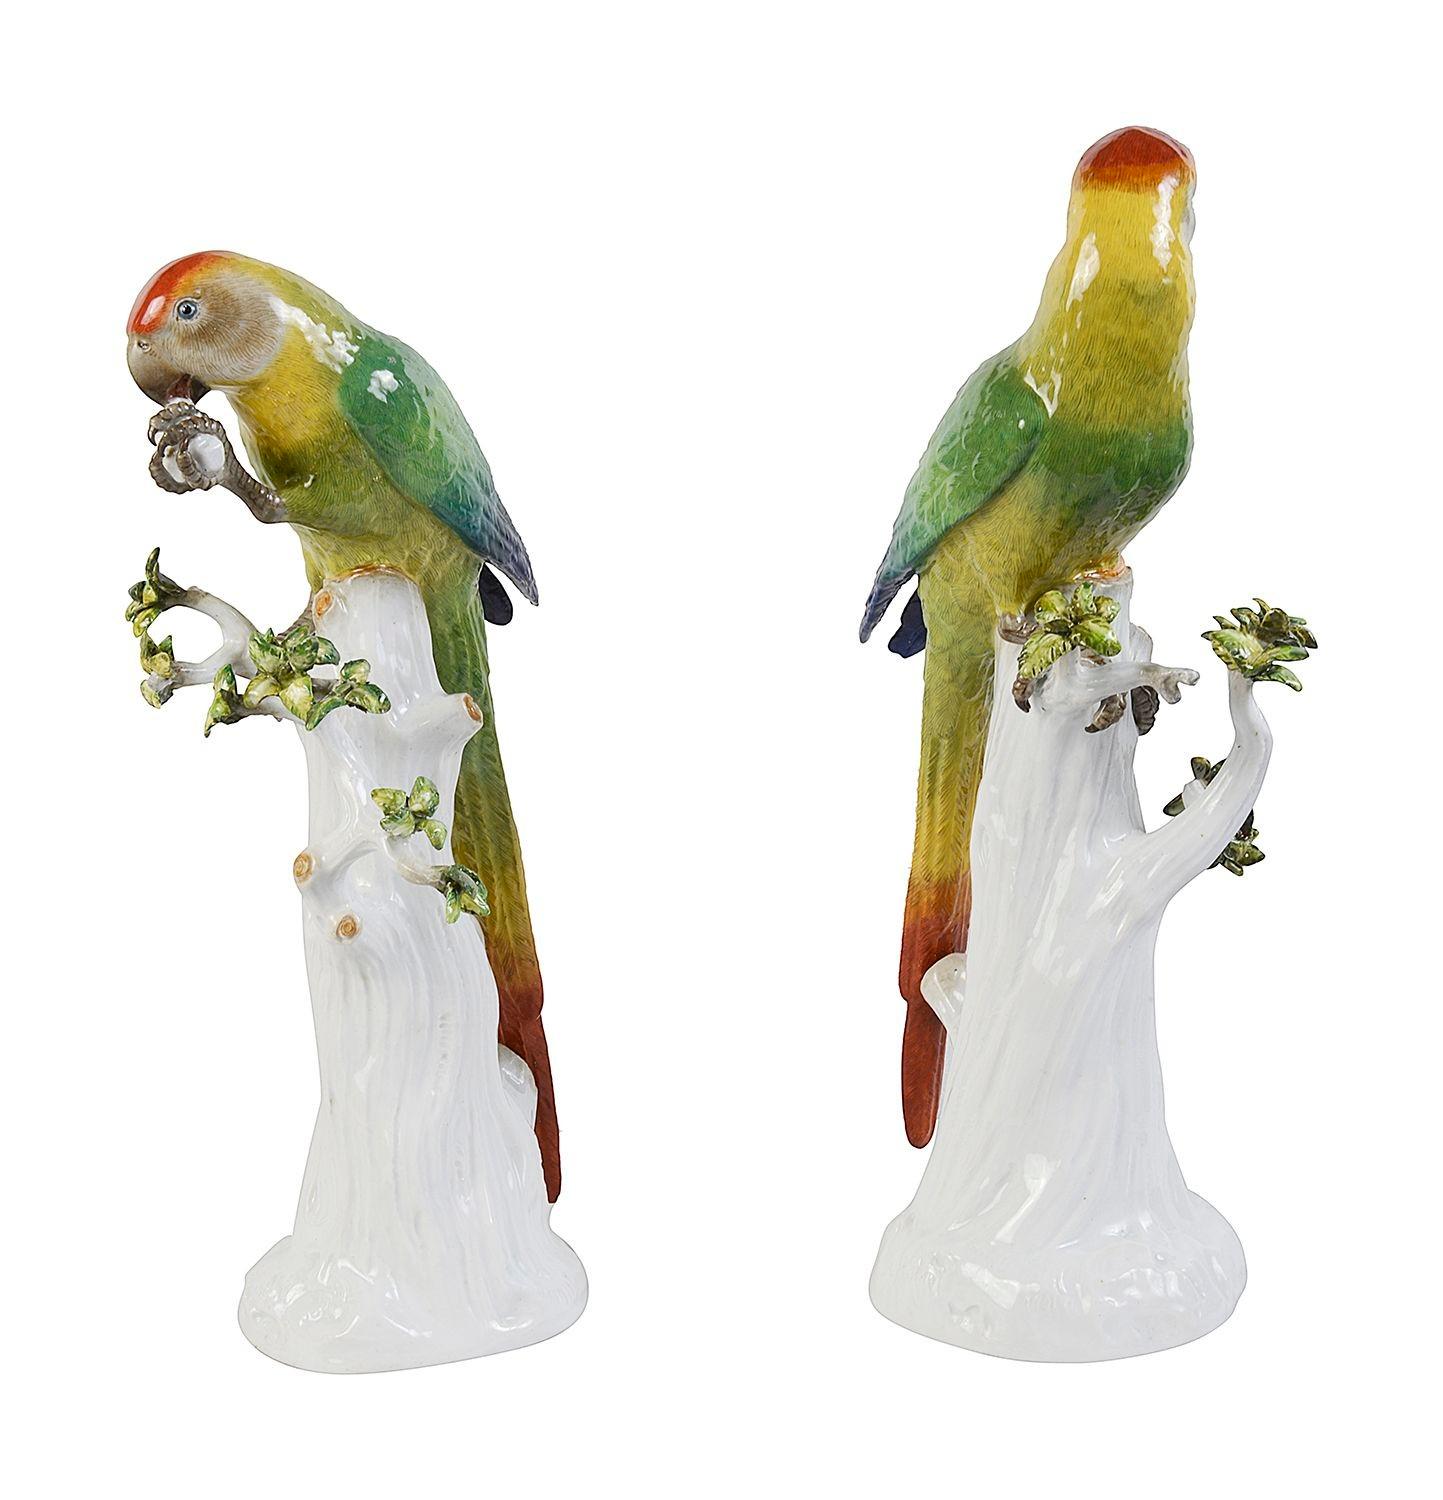 A striking, fine quality pair of late 19th Century Meissen porcelain Parrots pirched on tree trunks, each having wonderful bold colouring and detail.

Batch 76 62436 DHKZ